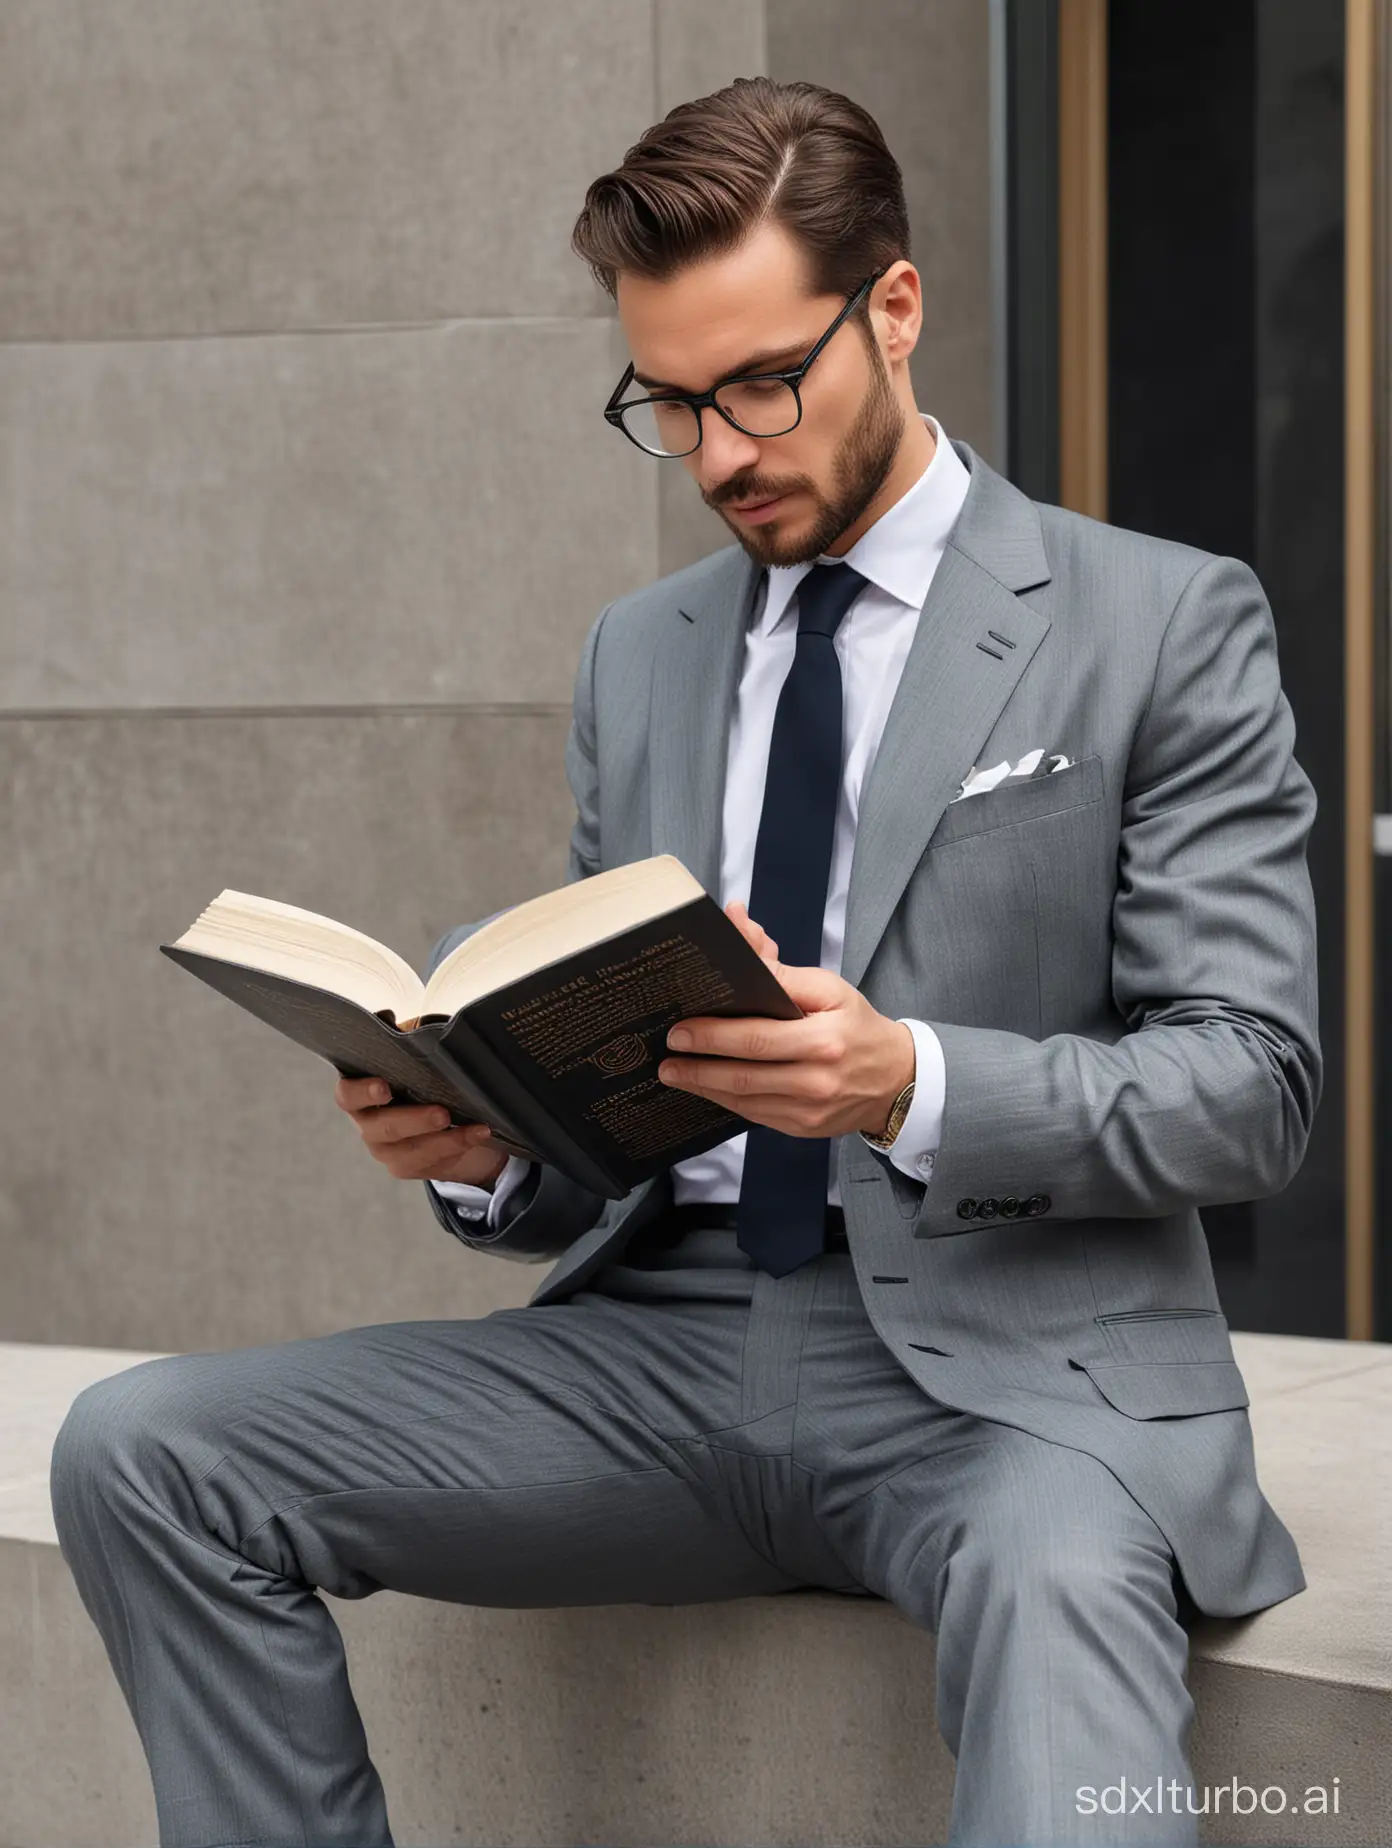 A man in a suit is reading a book